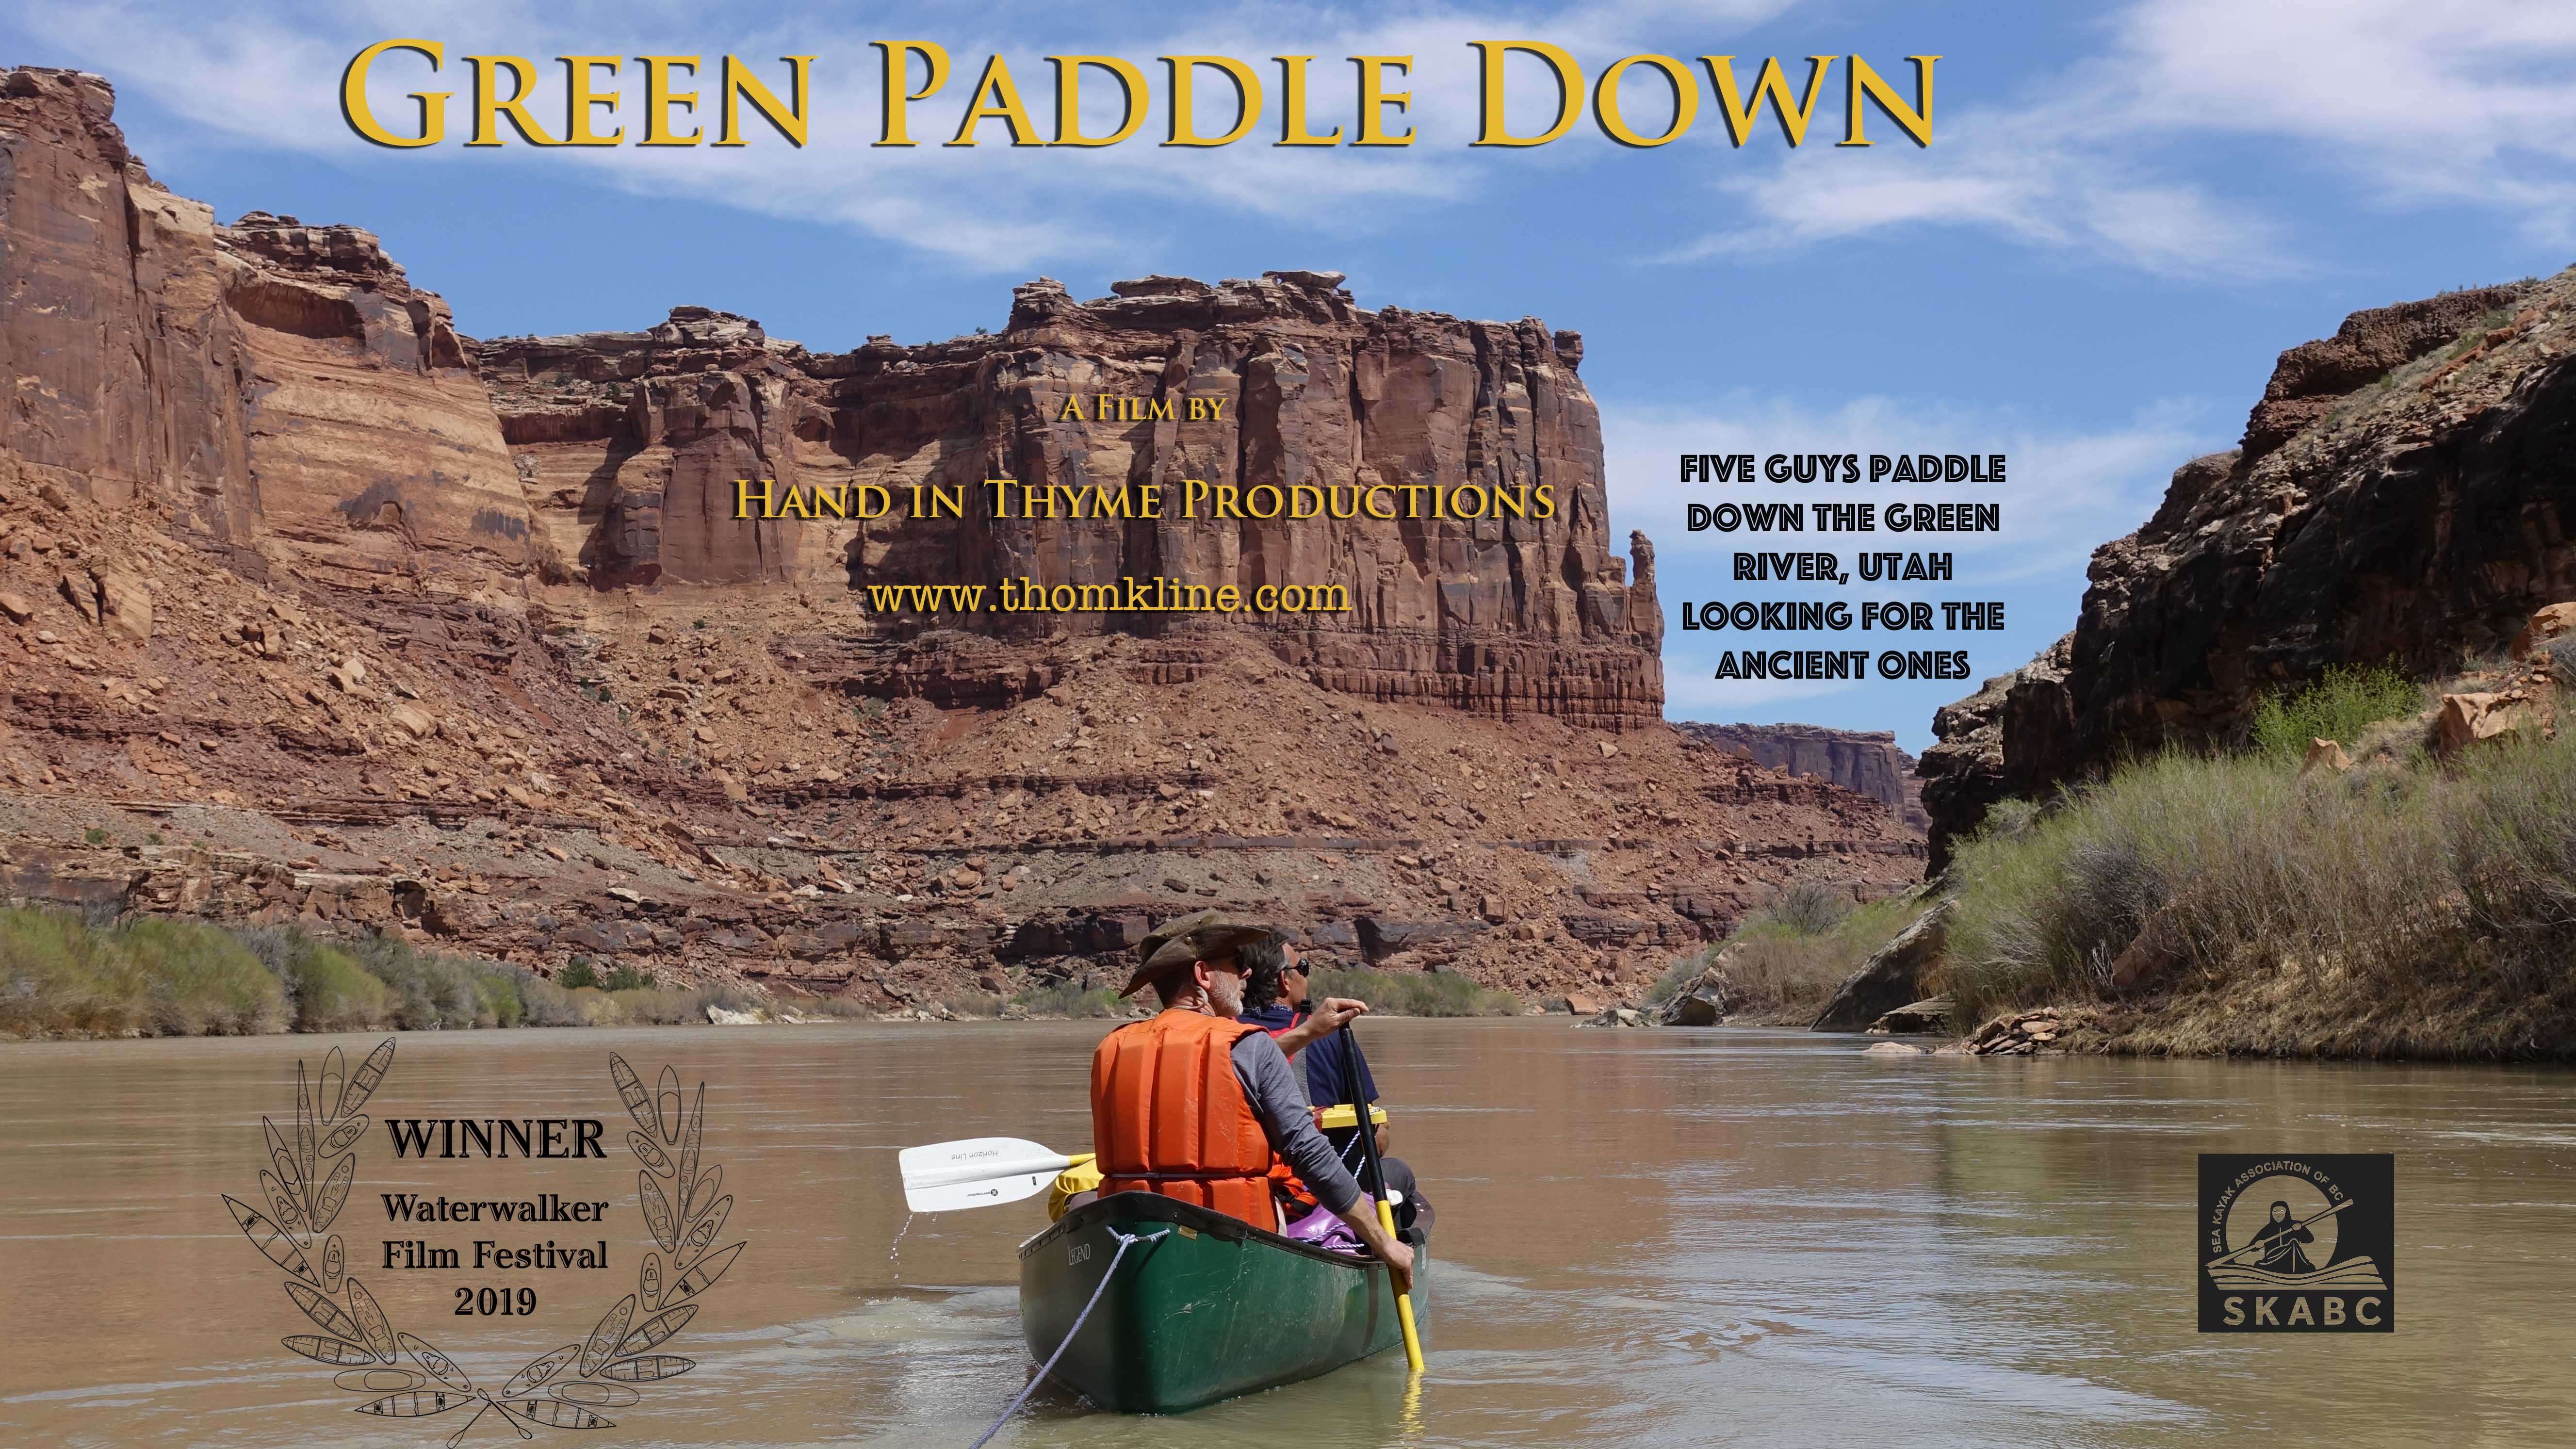 Five Guys paddle Down the Green River, Utah in search of the ancient ones.